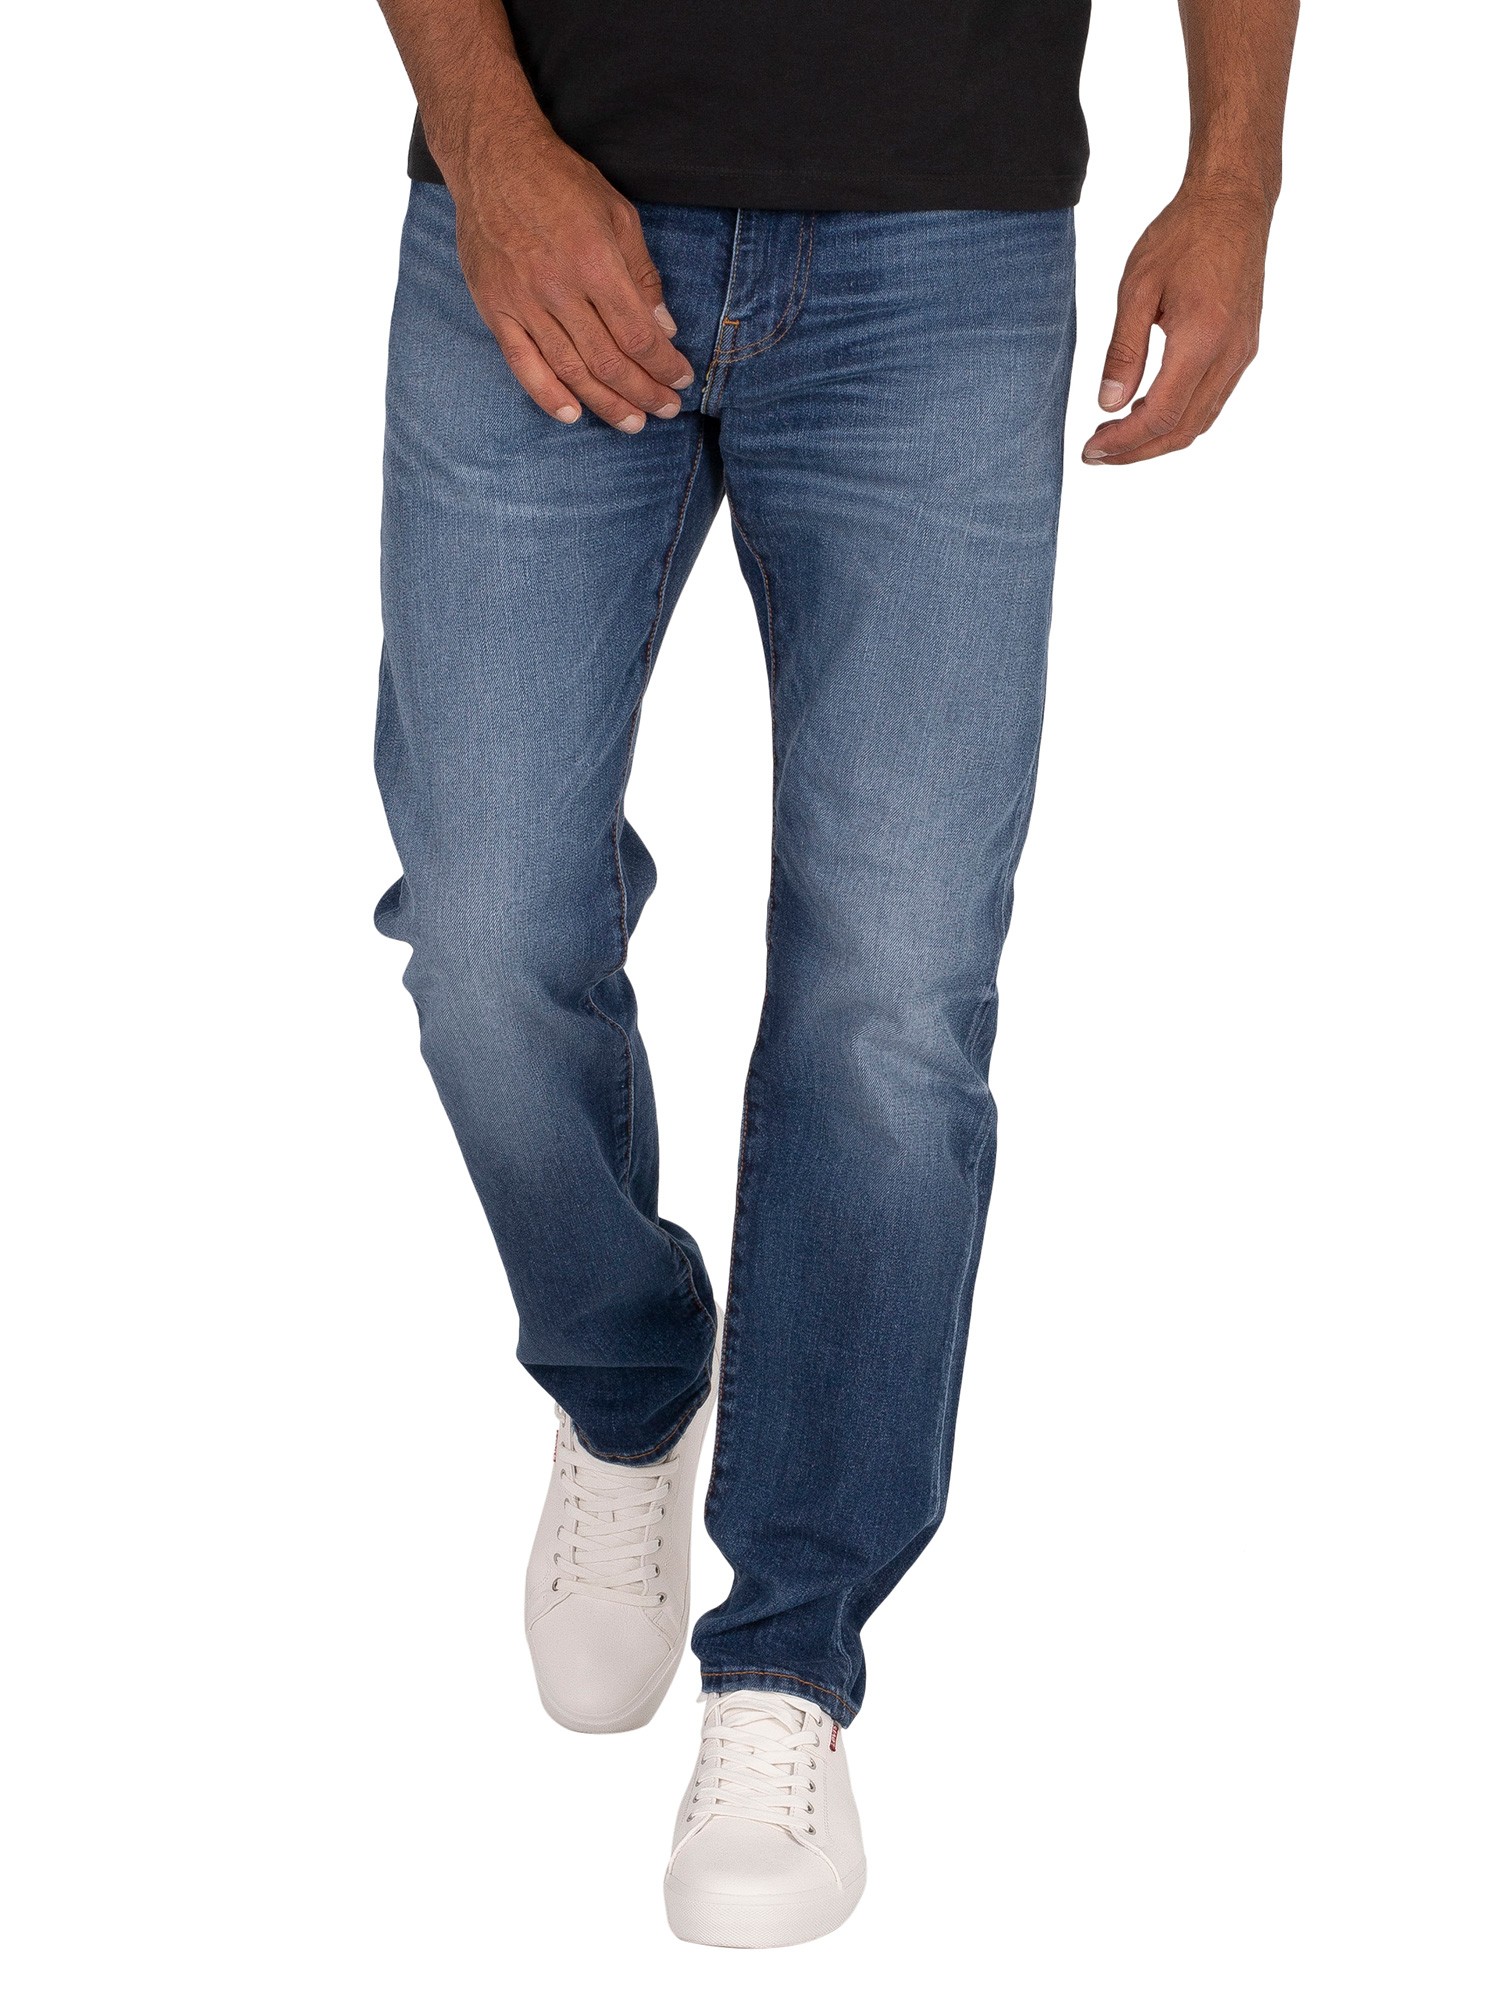 Levi's 502 Taper Jeans - Smoke Stacked 